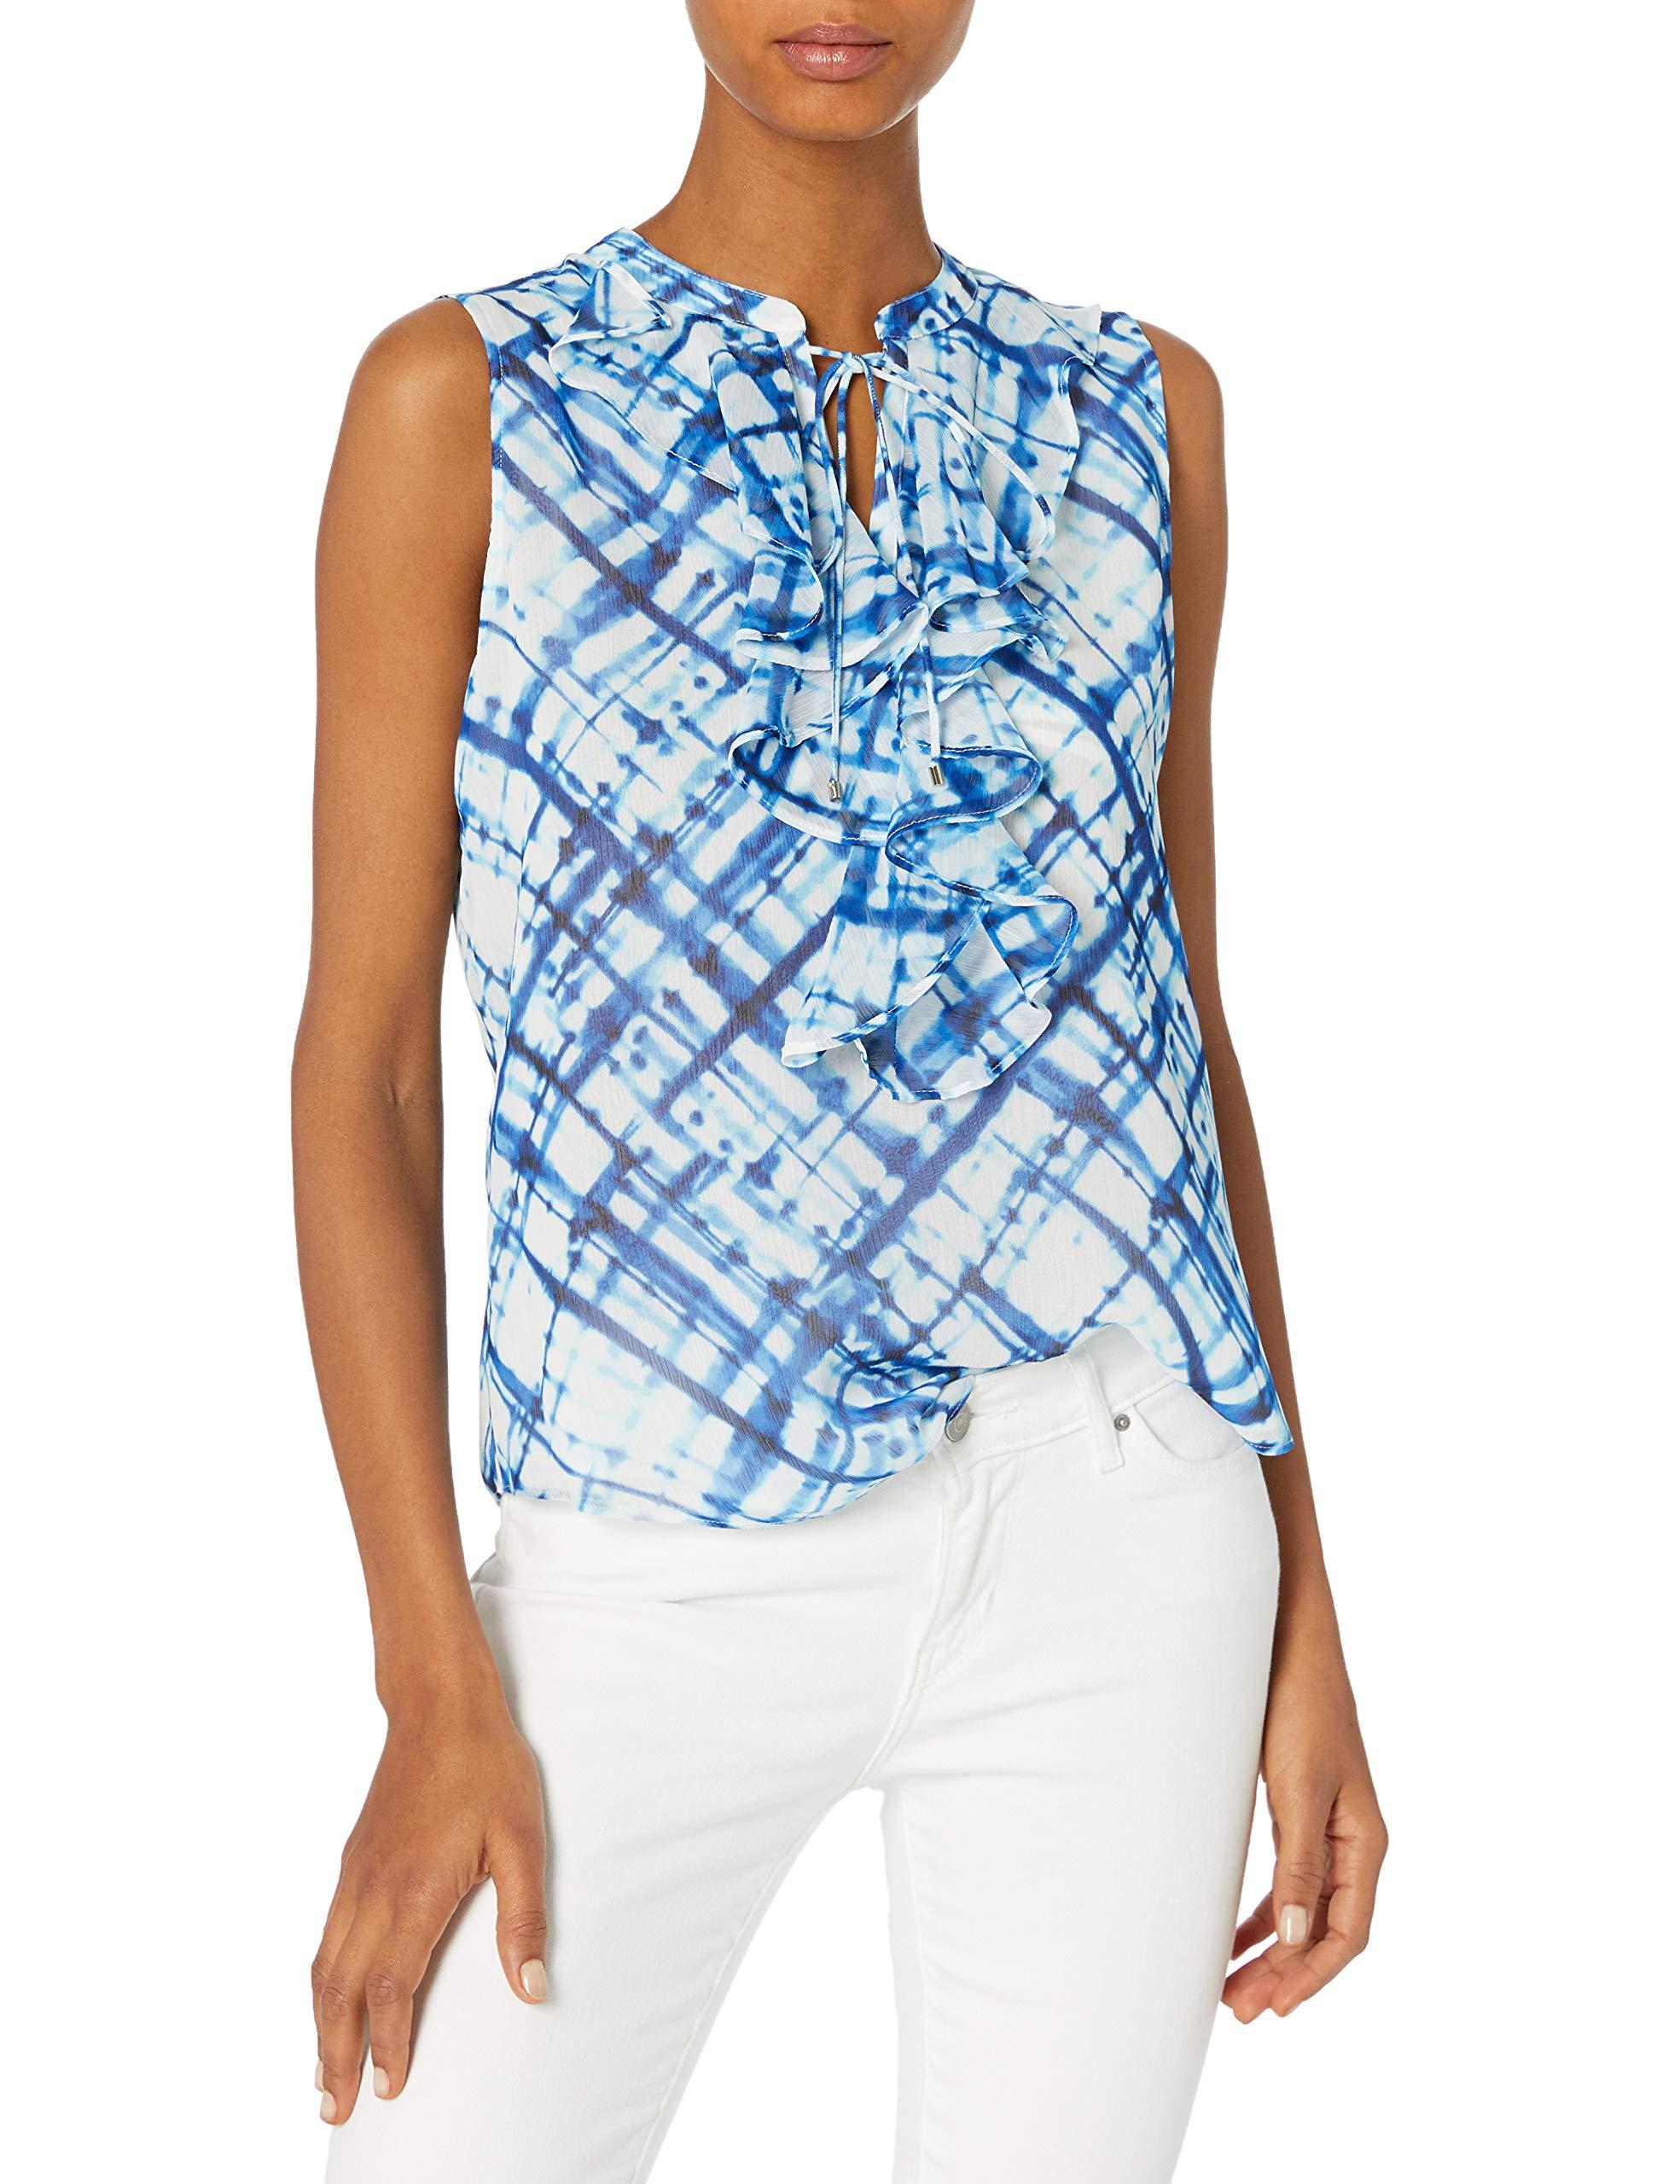 Tommy Hilfiger Tie Dye Ruffle Front Sleeveless Woven Top Blouse in Blue ...